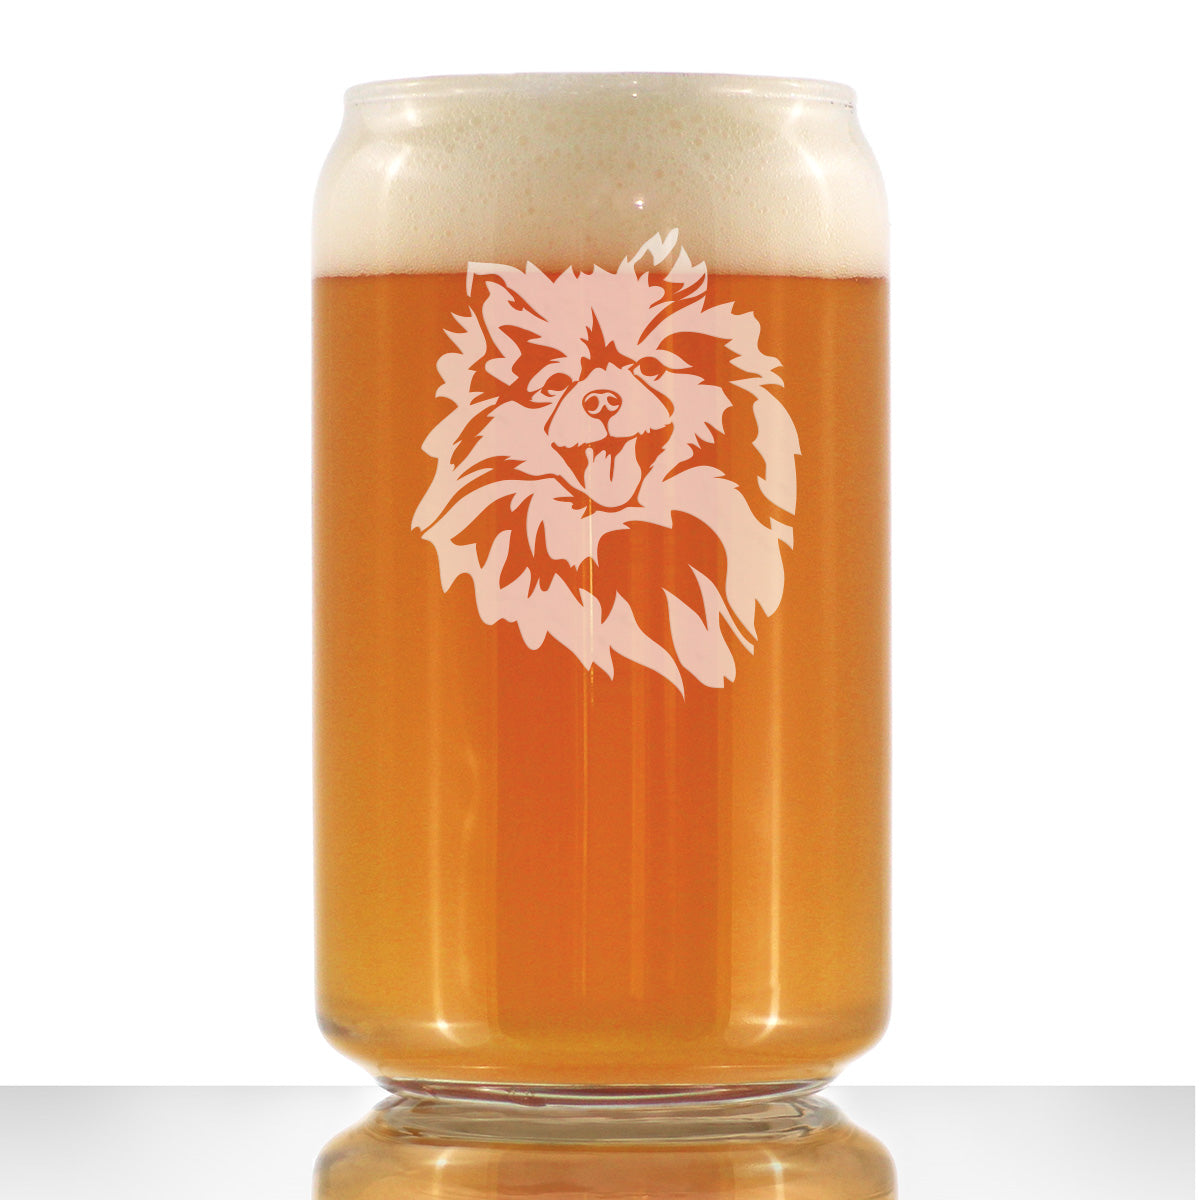 Pomeranian Face Beer Can Pint Glass - Unique Dog Themed Decor and Gifts for Moms &amp; Dads of Pomeranians - 16 Oz